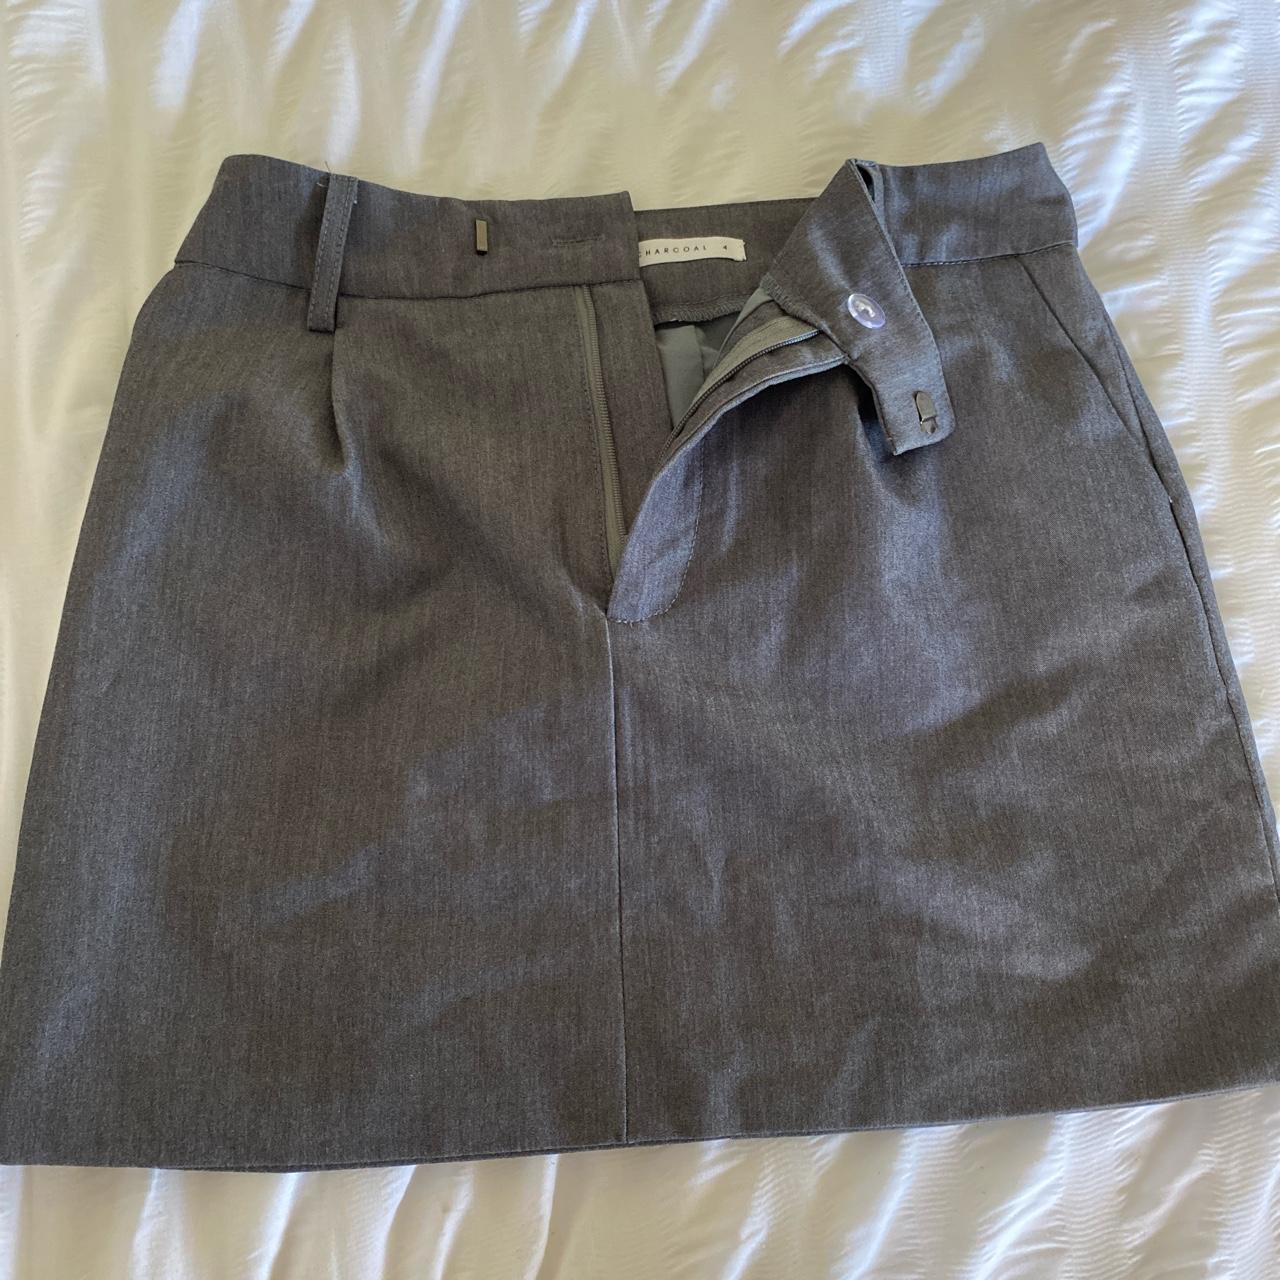 Cute mini skirt just too small for me - Depop